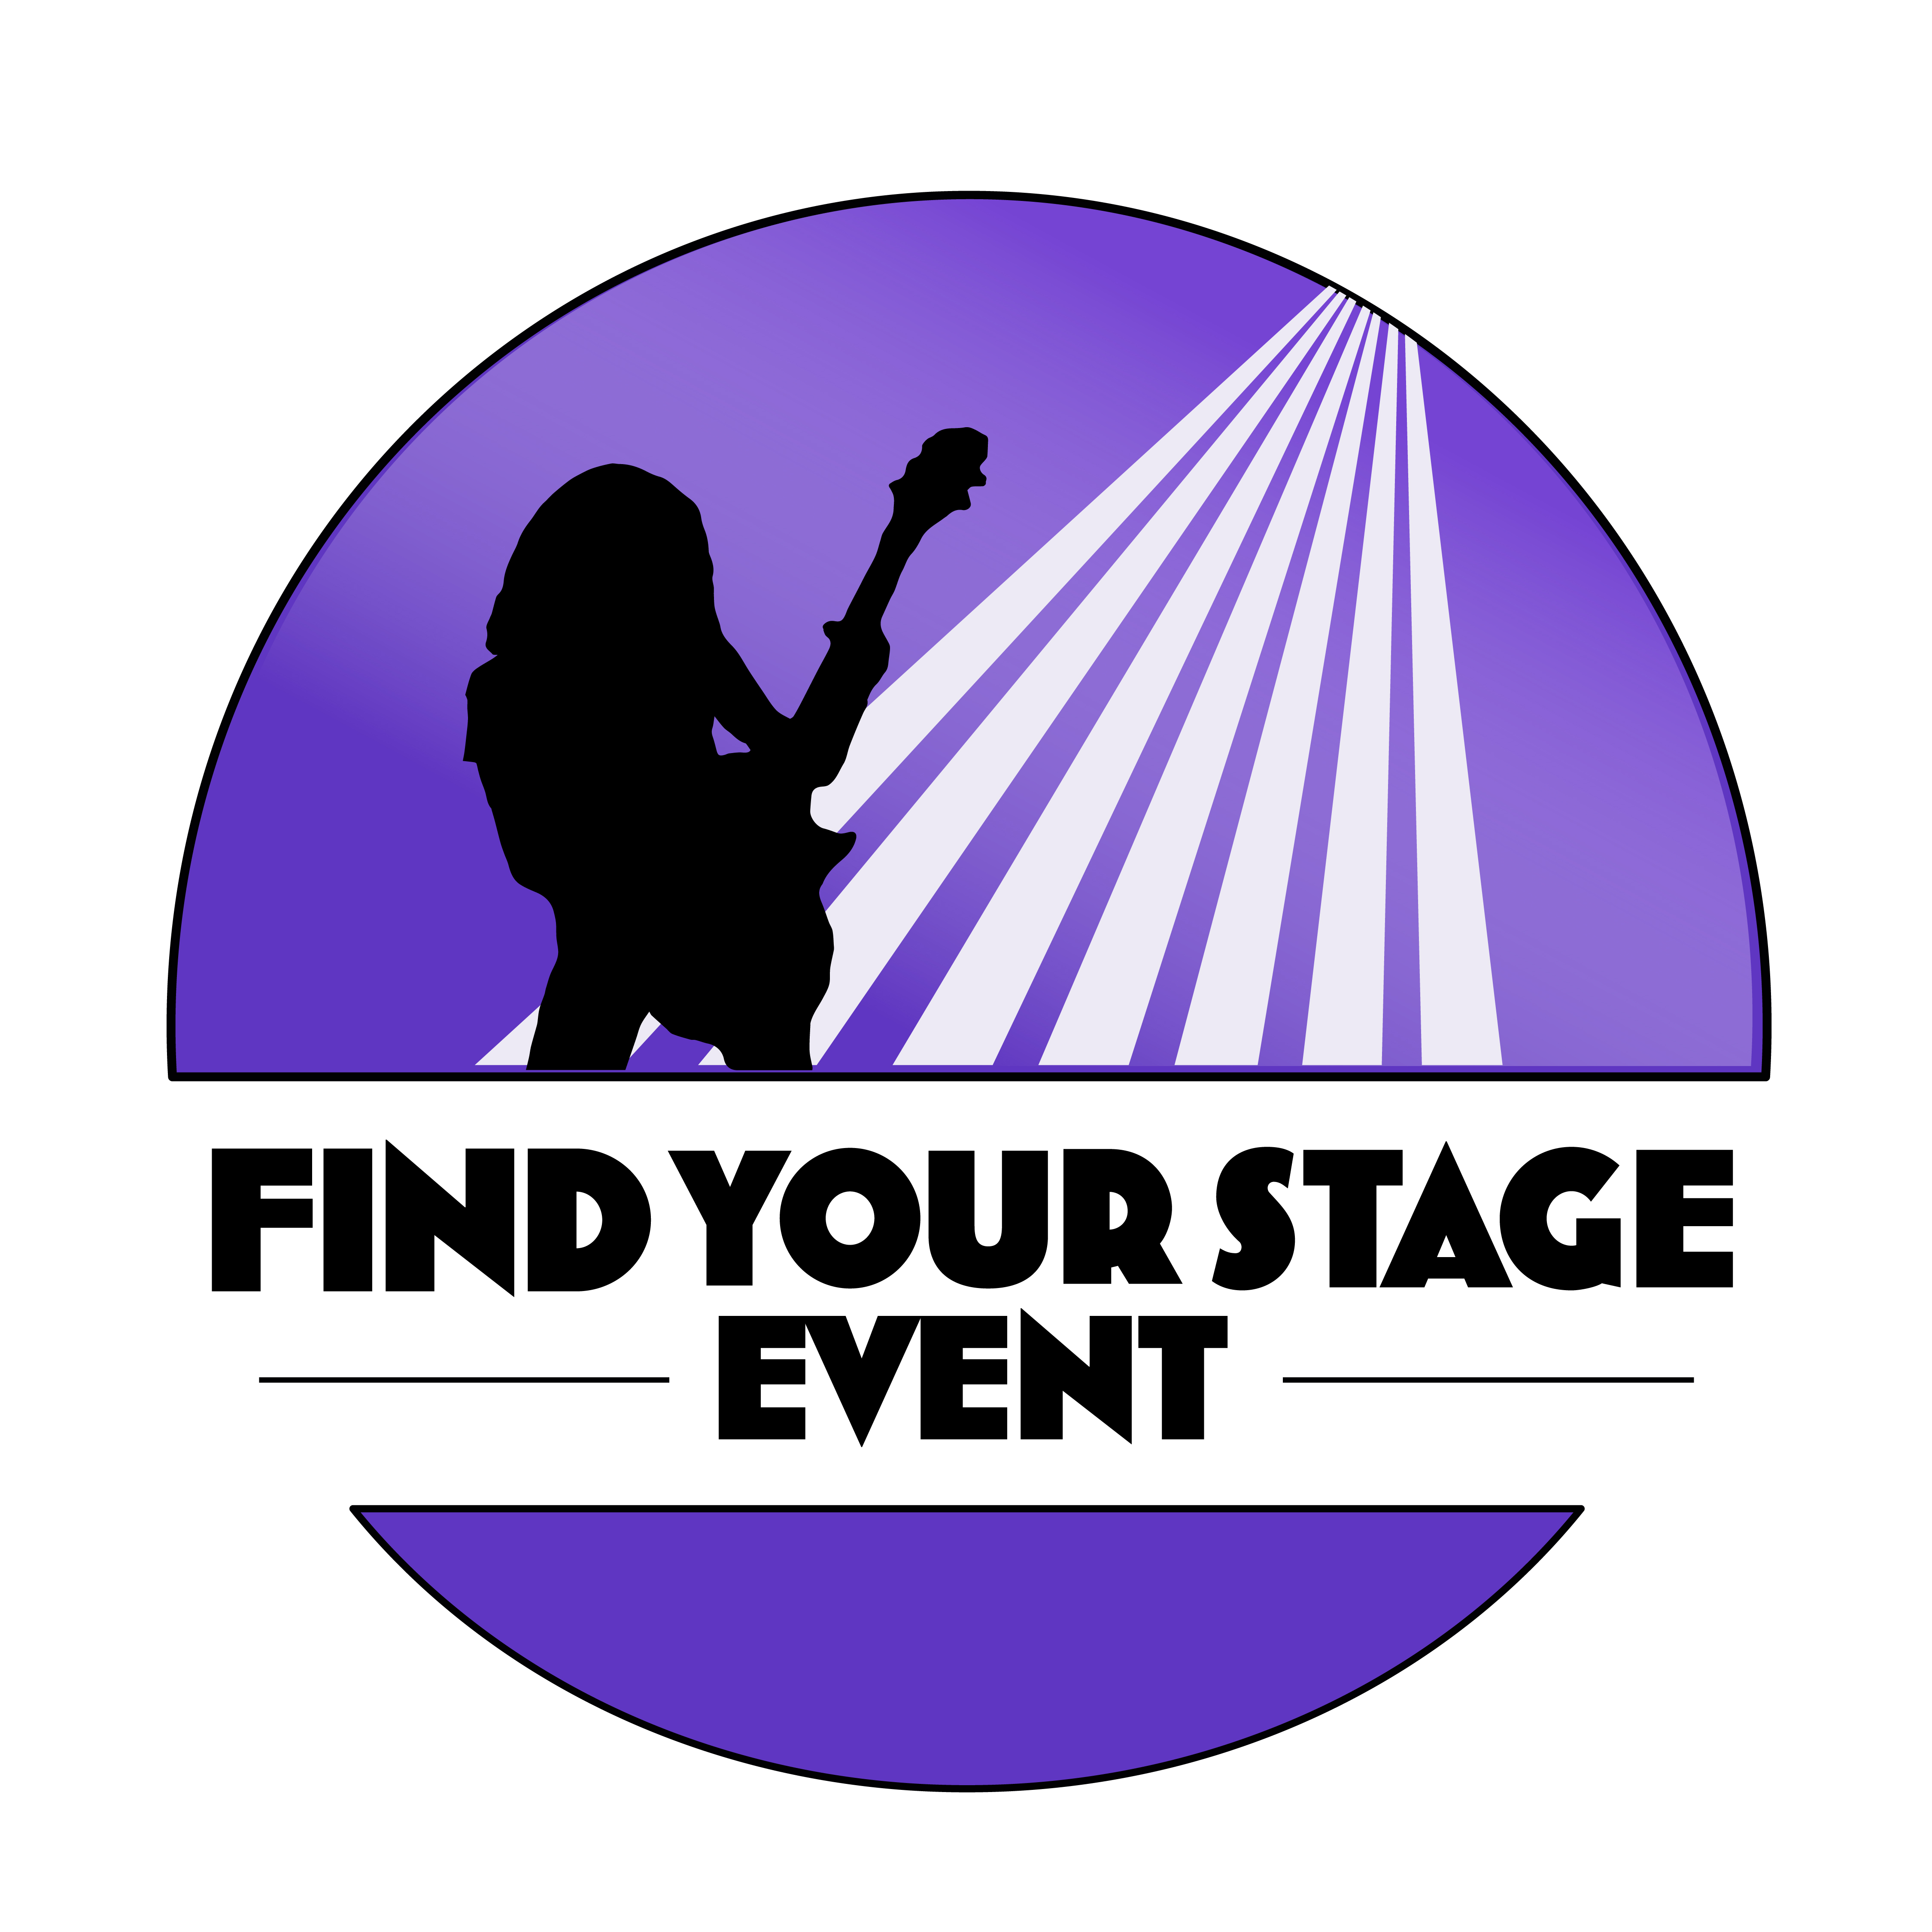 Find Your Stage Event